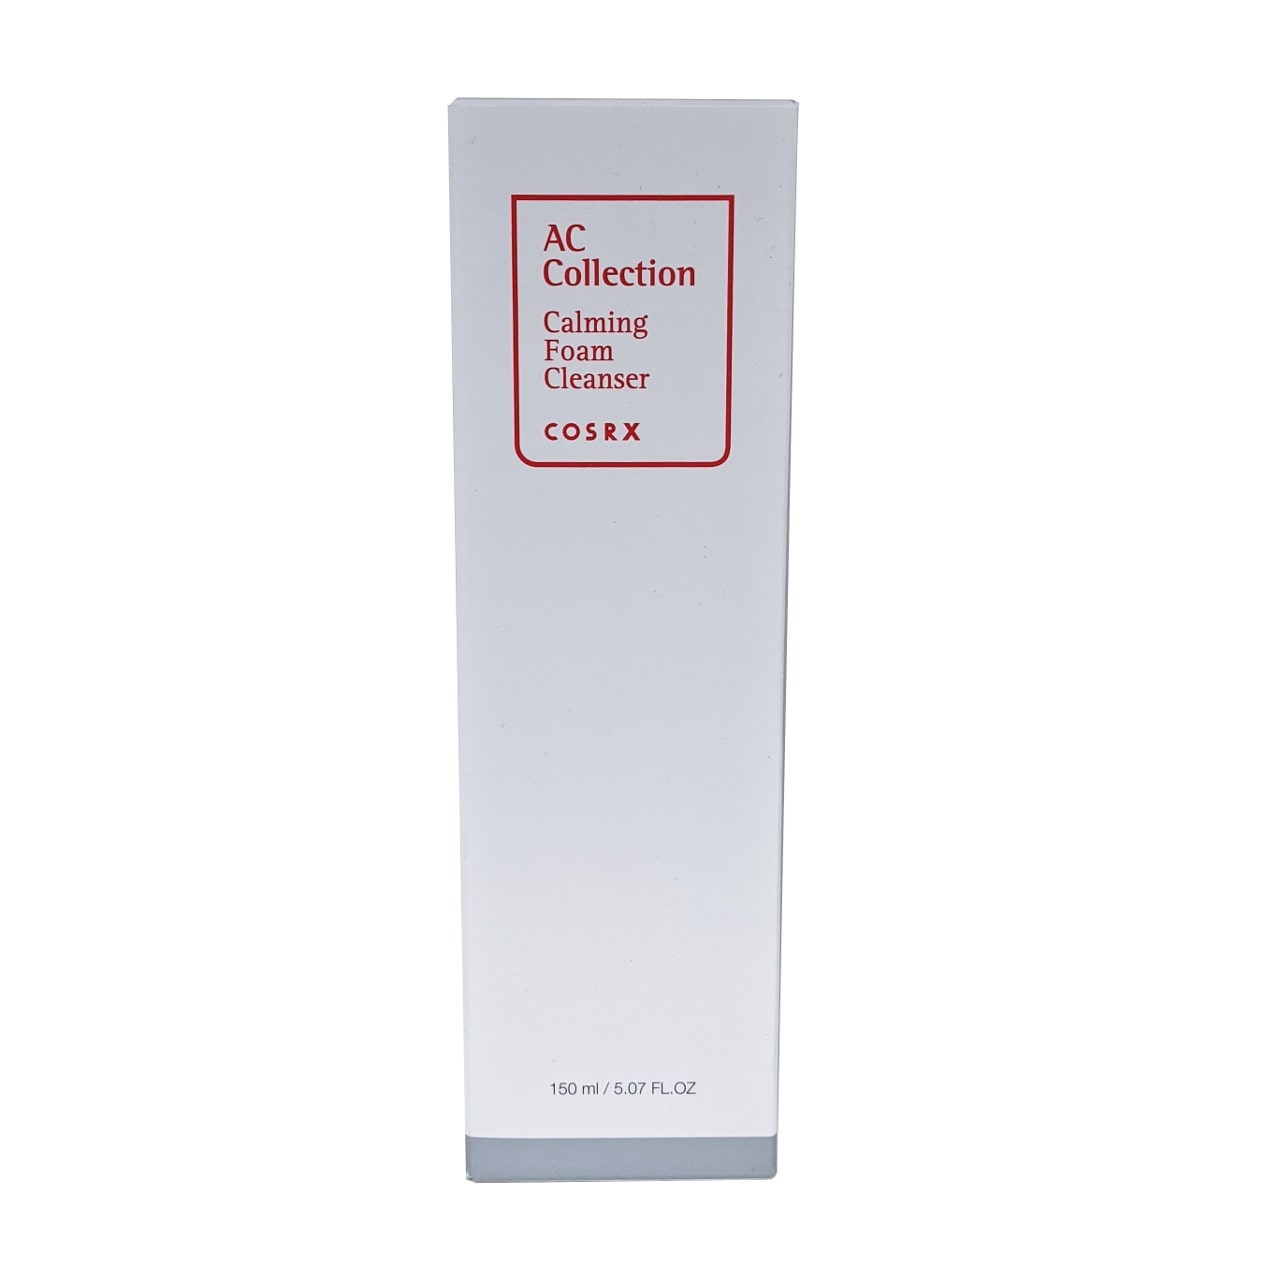 Product label for COSRX AC Collection Calming Foam Cleanser